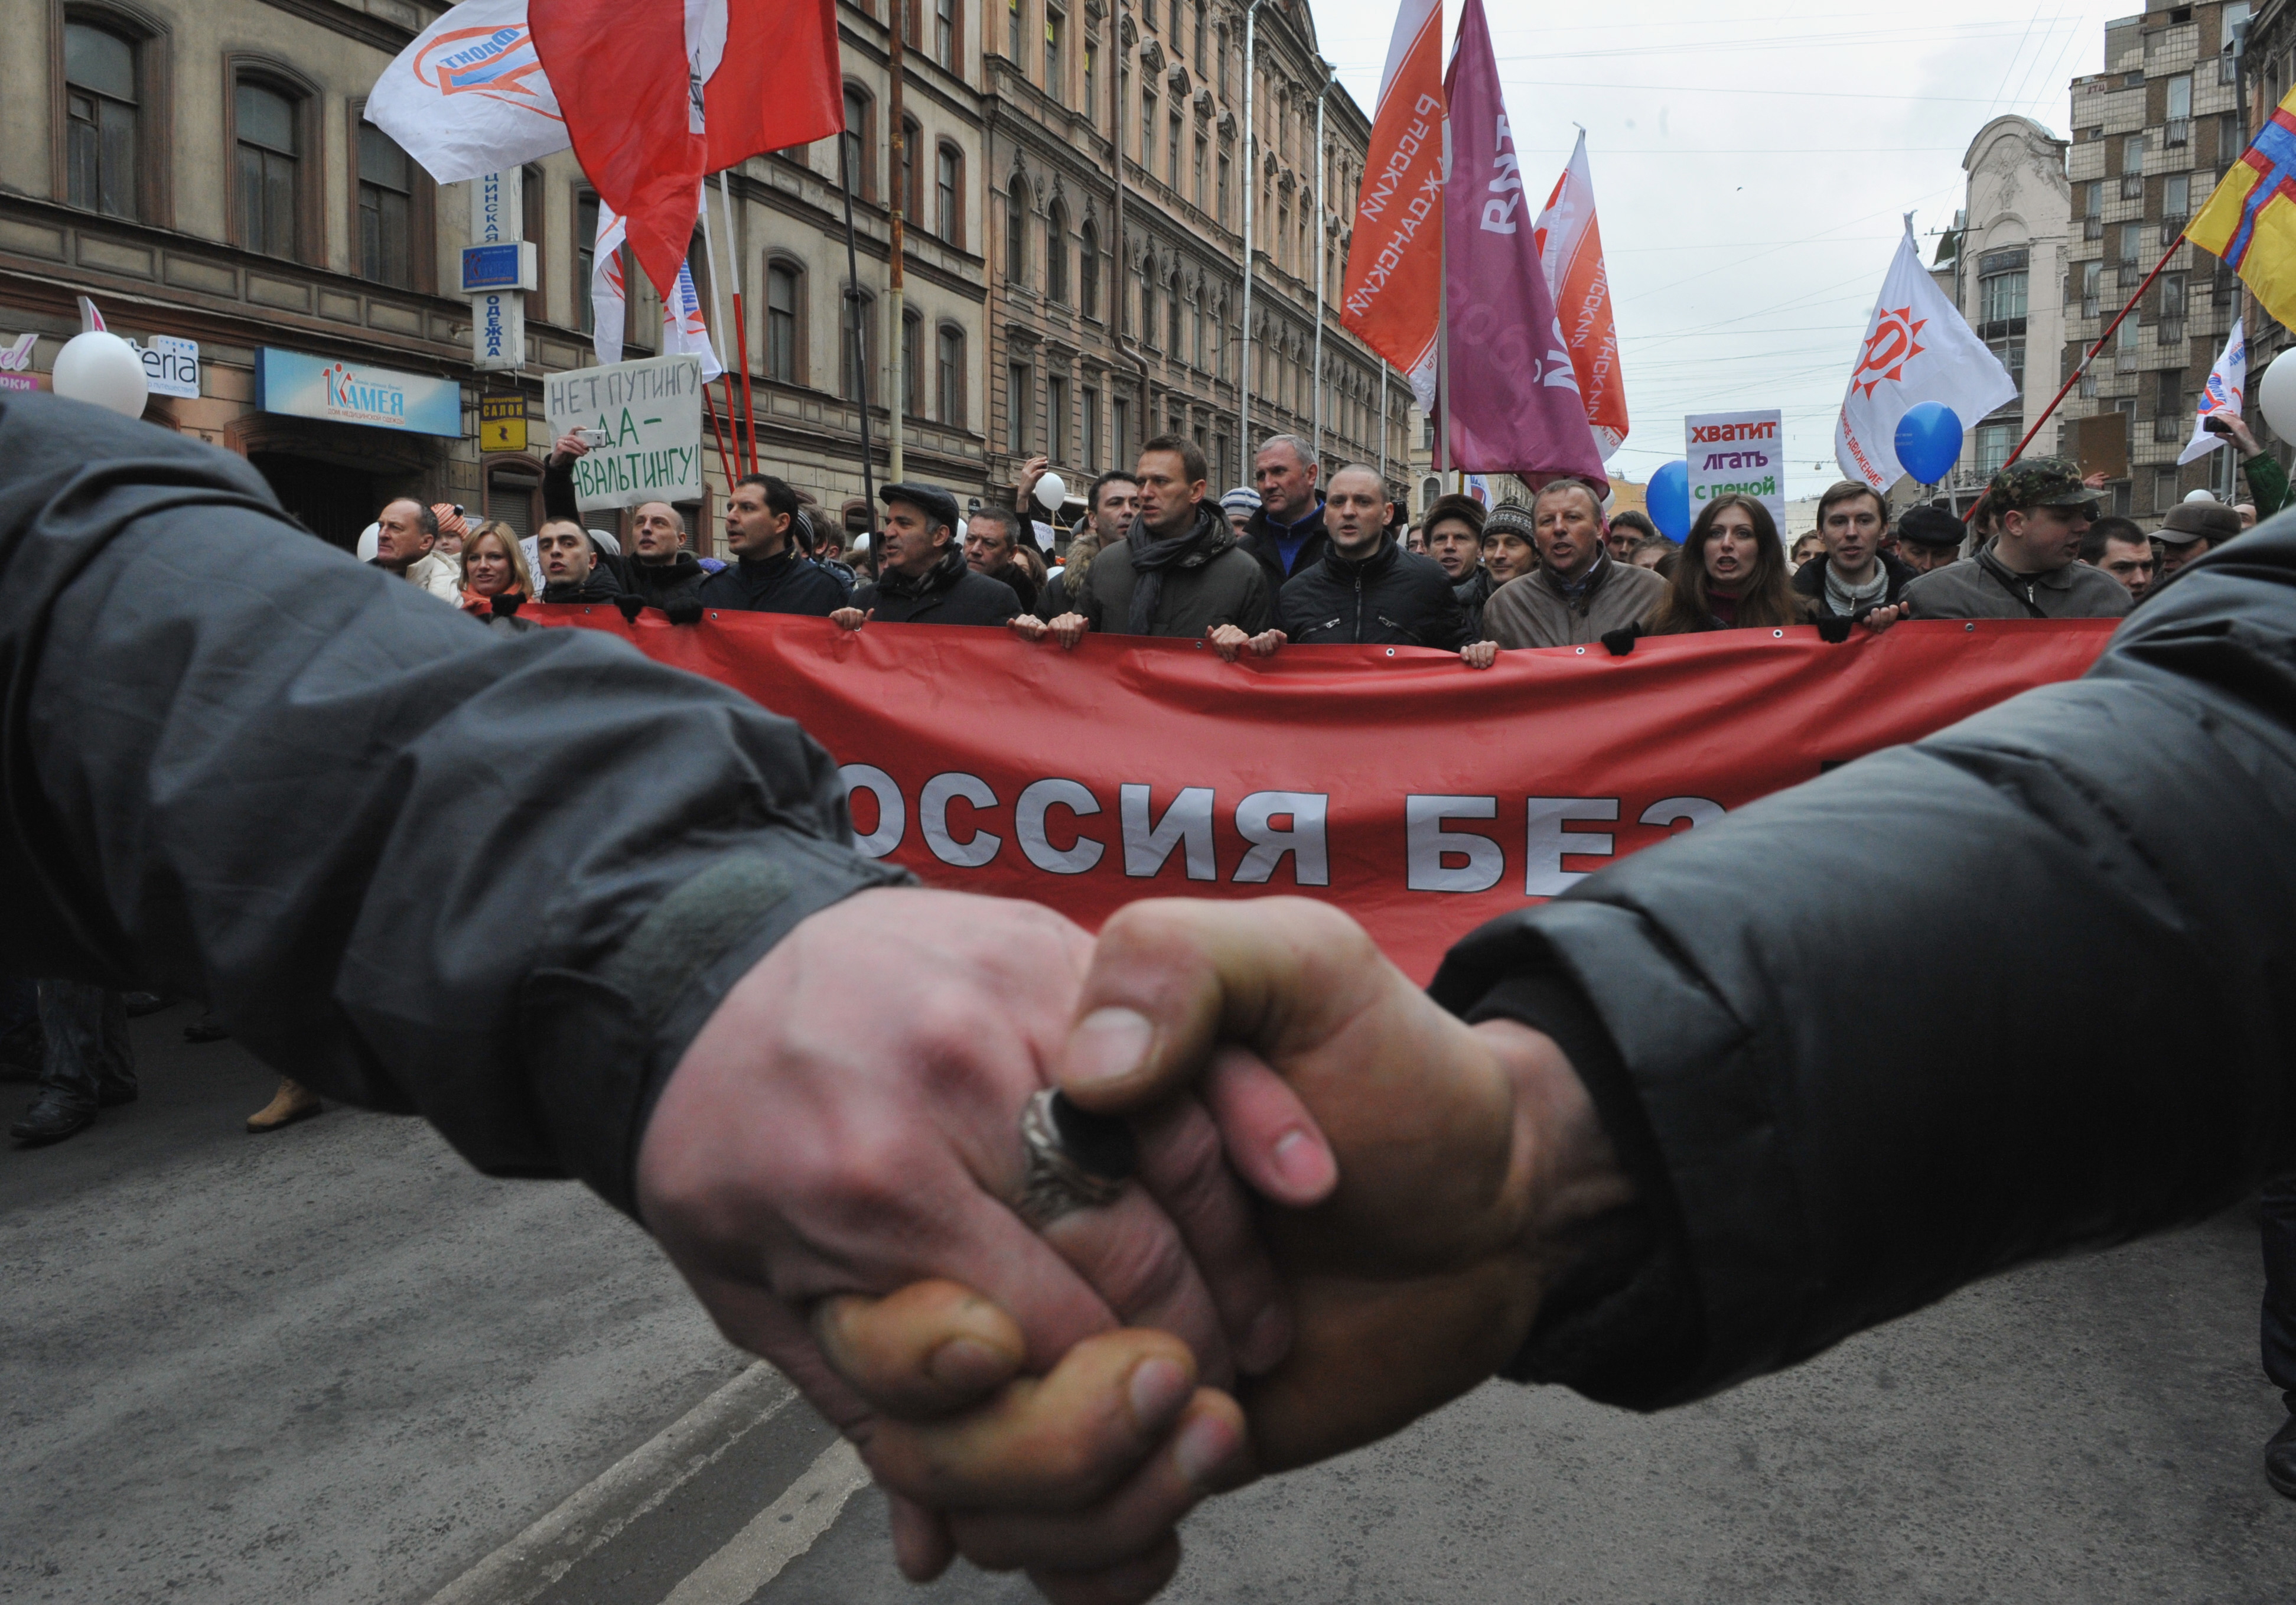 Navalny and other members of Russia's opposition march in St. Petersburg, Russia, in February 2012. They were in Vladimir Putin's native city, demonstrating against his likely return to the Kremlin.